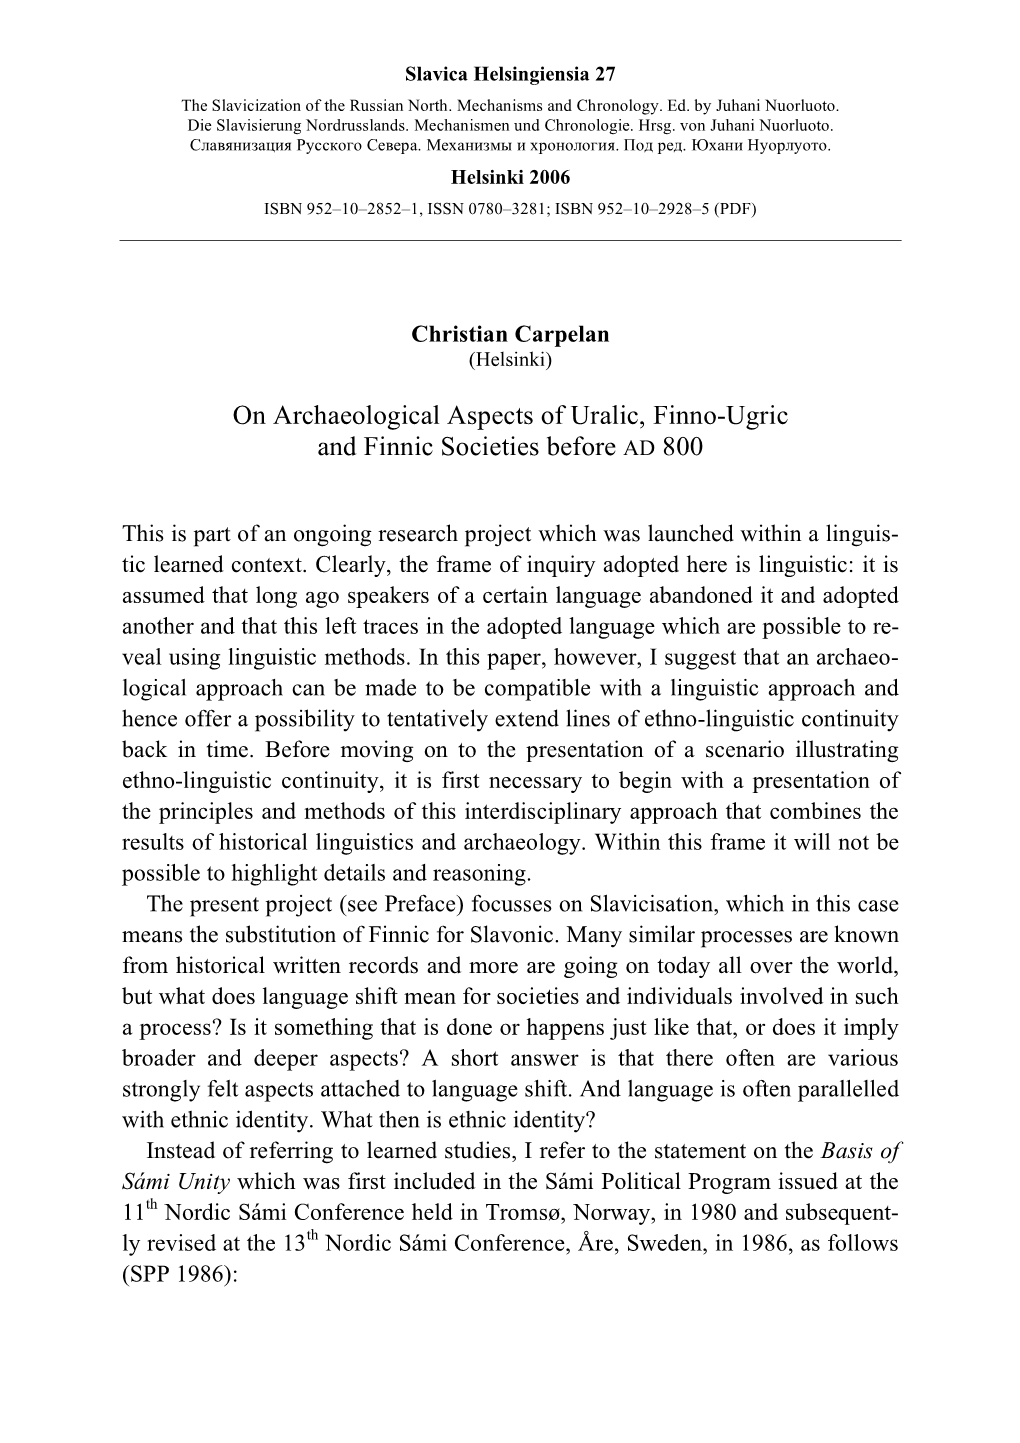 On Archaeological Aspects of Uralic, Finno-Ugric and Finnic Societies Before AD 800